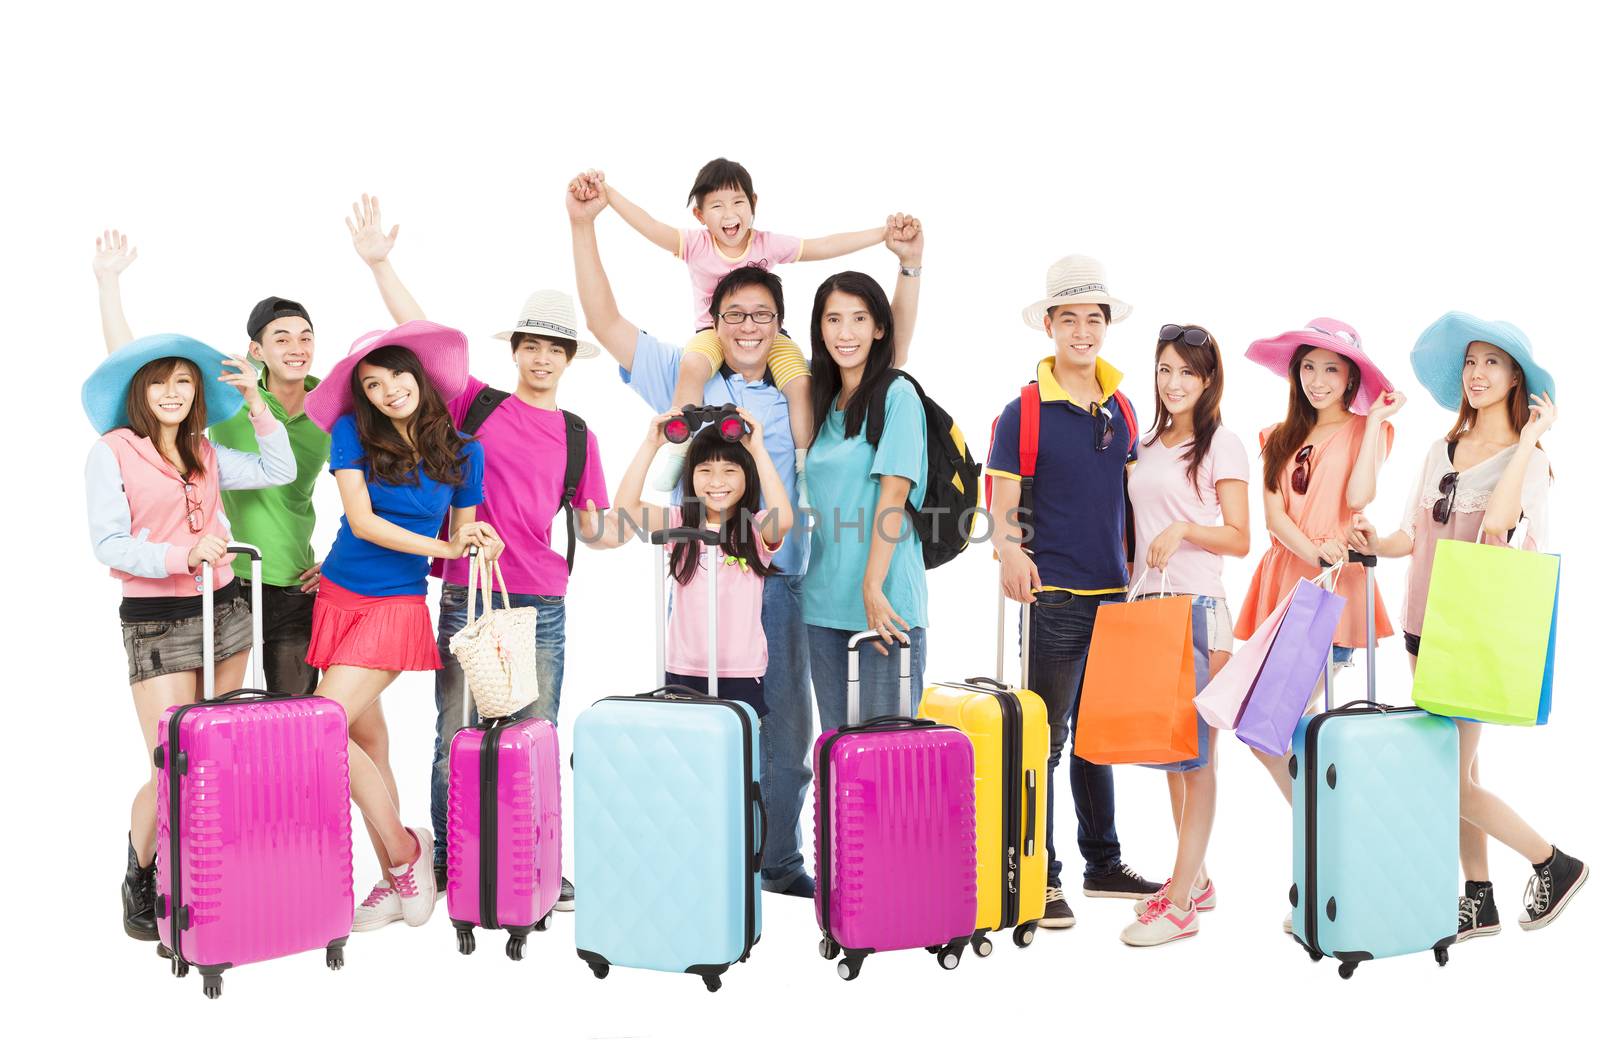 Group of happy people are ready to travel together by tomwang